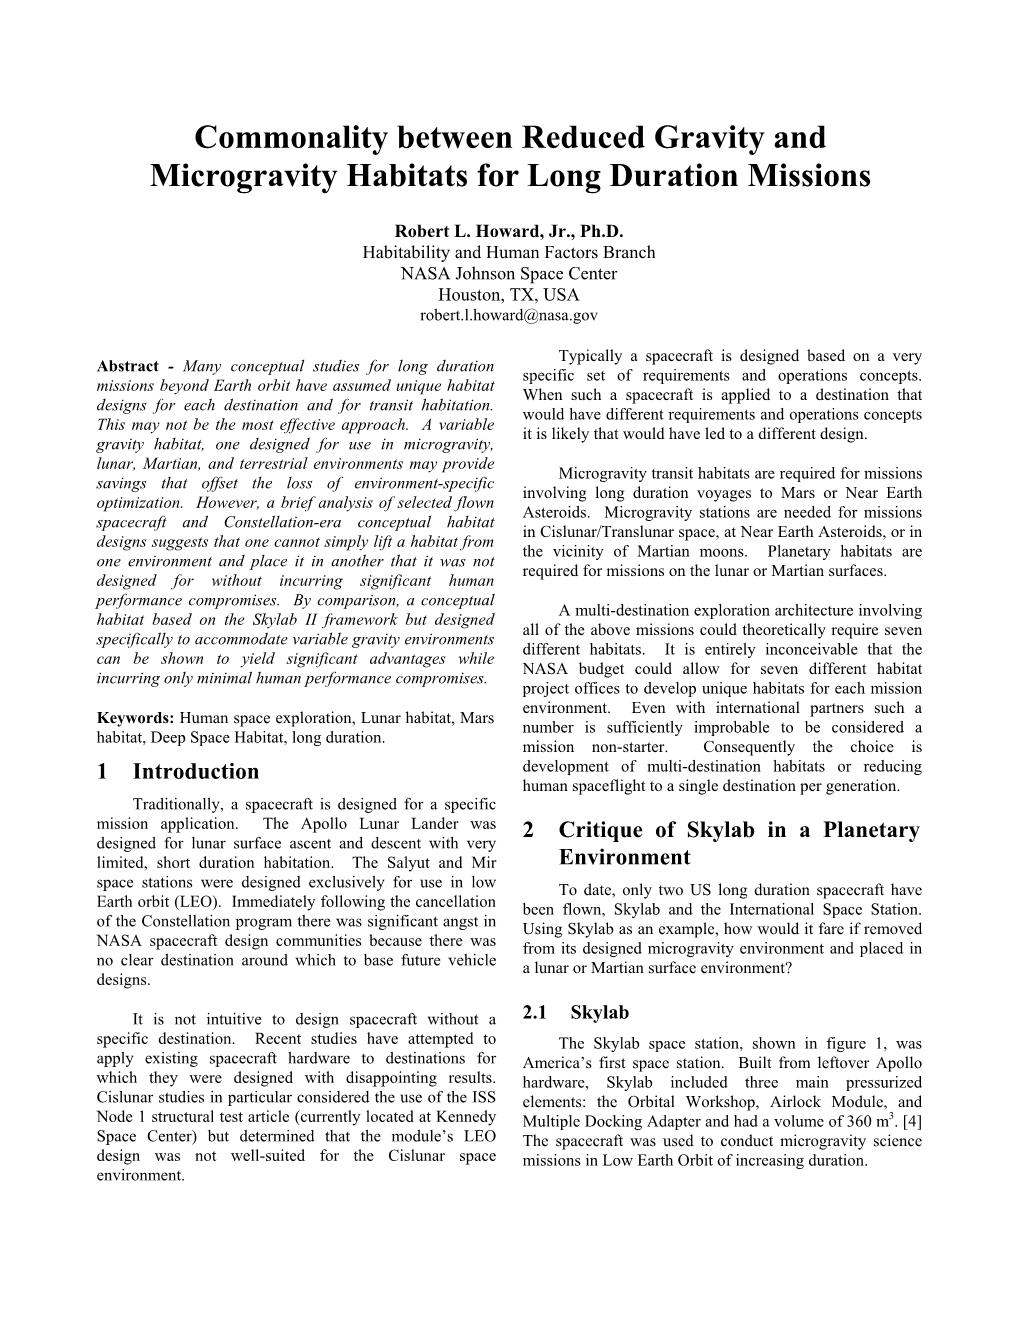 Commonality Between Reduced Gravity and Microgravity Habitats for Long Duration Missions